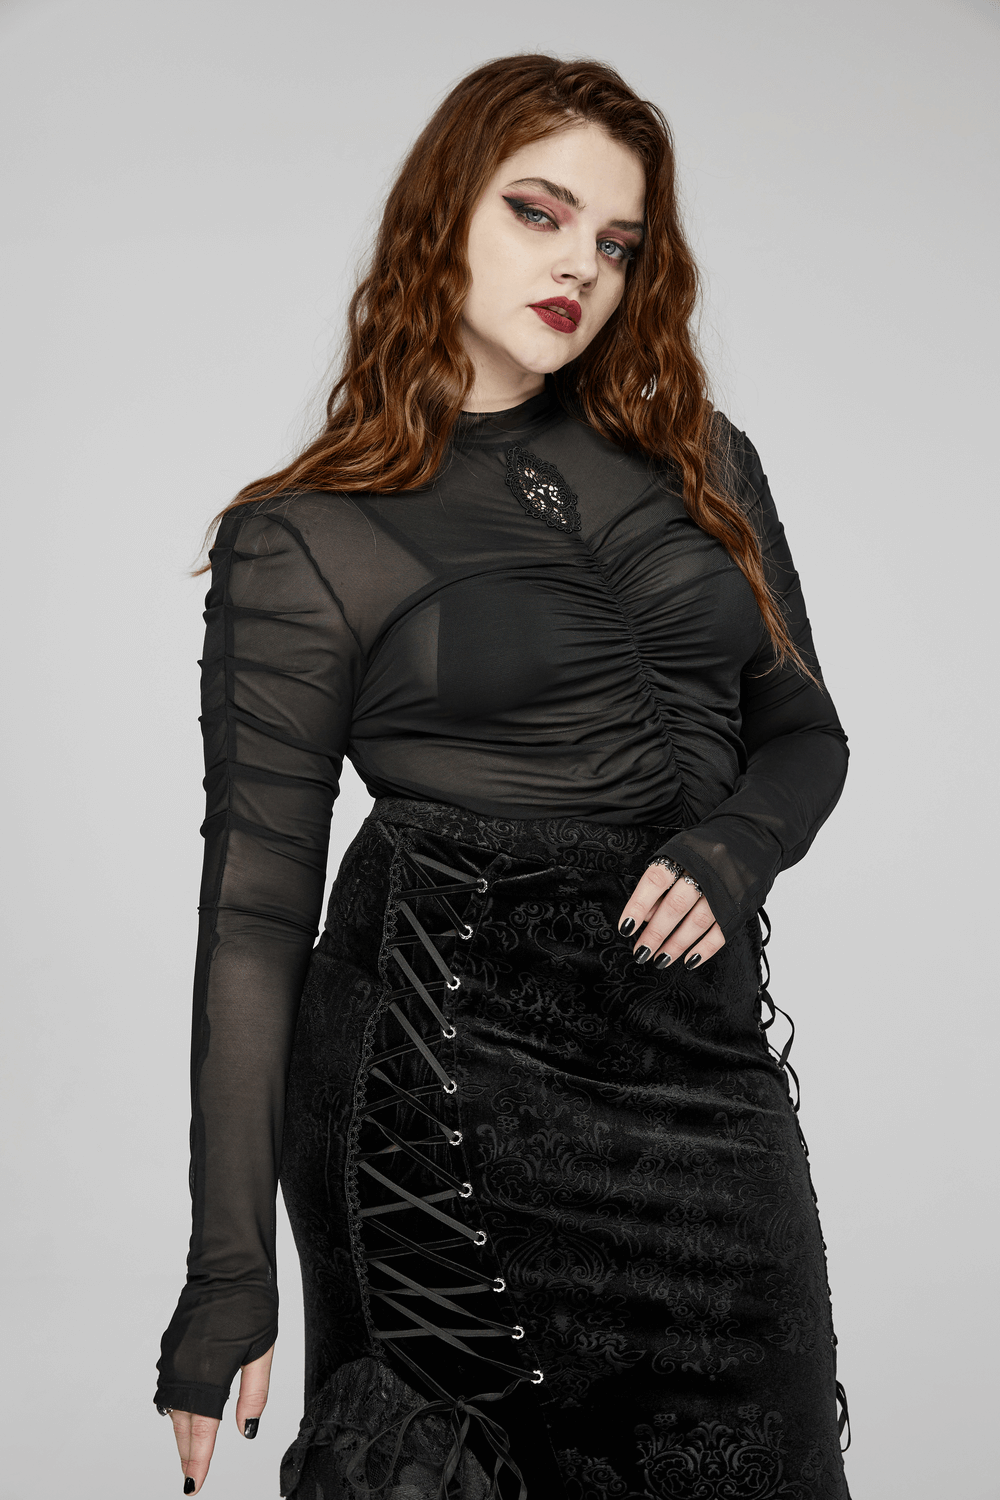 Women's Elastic Gothic Long Sleeved Mesh Pleated Top